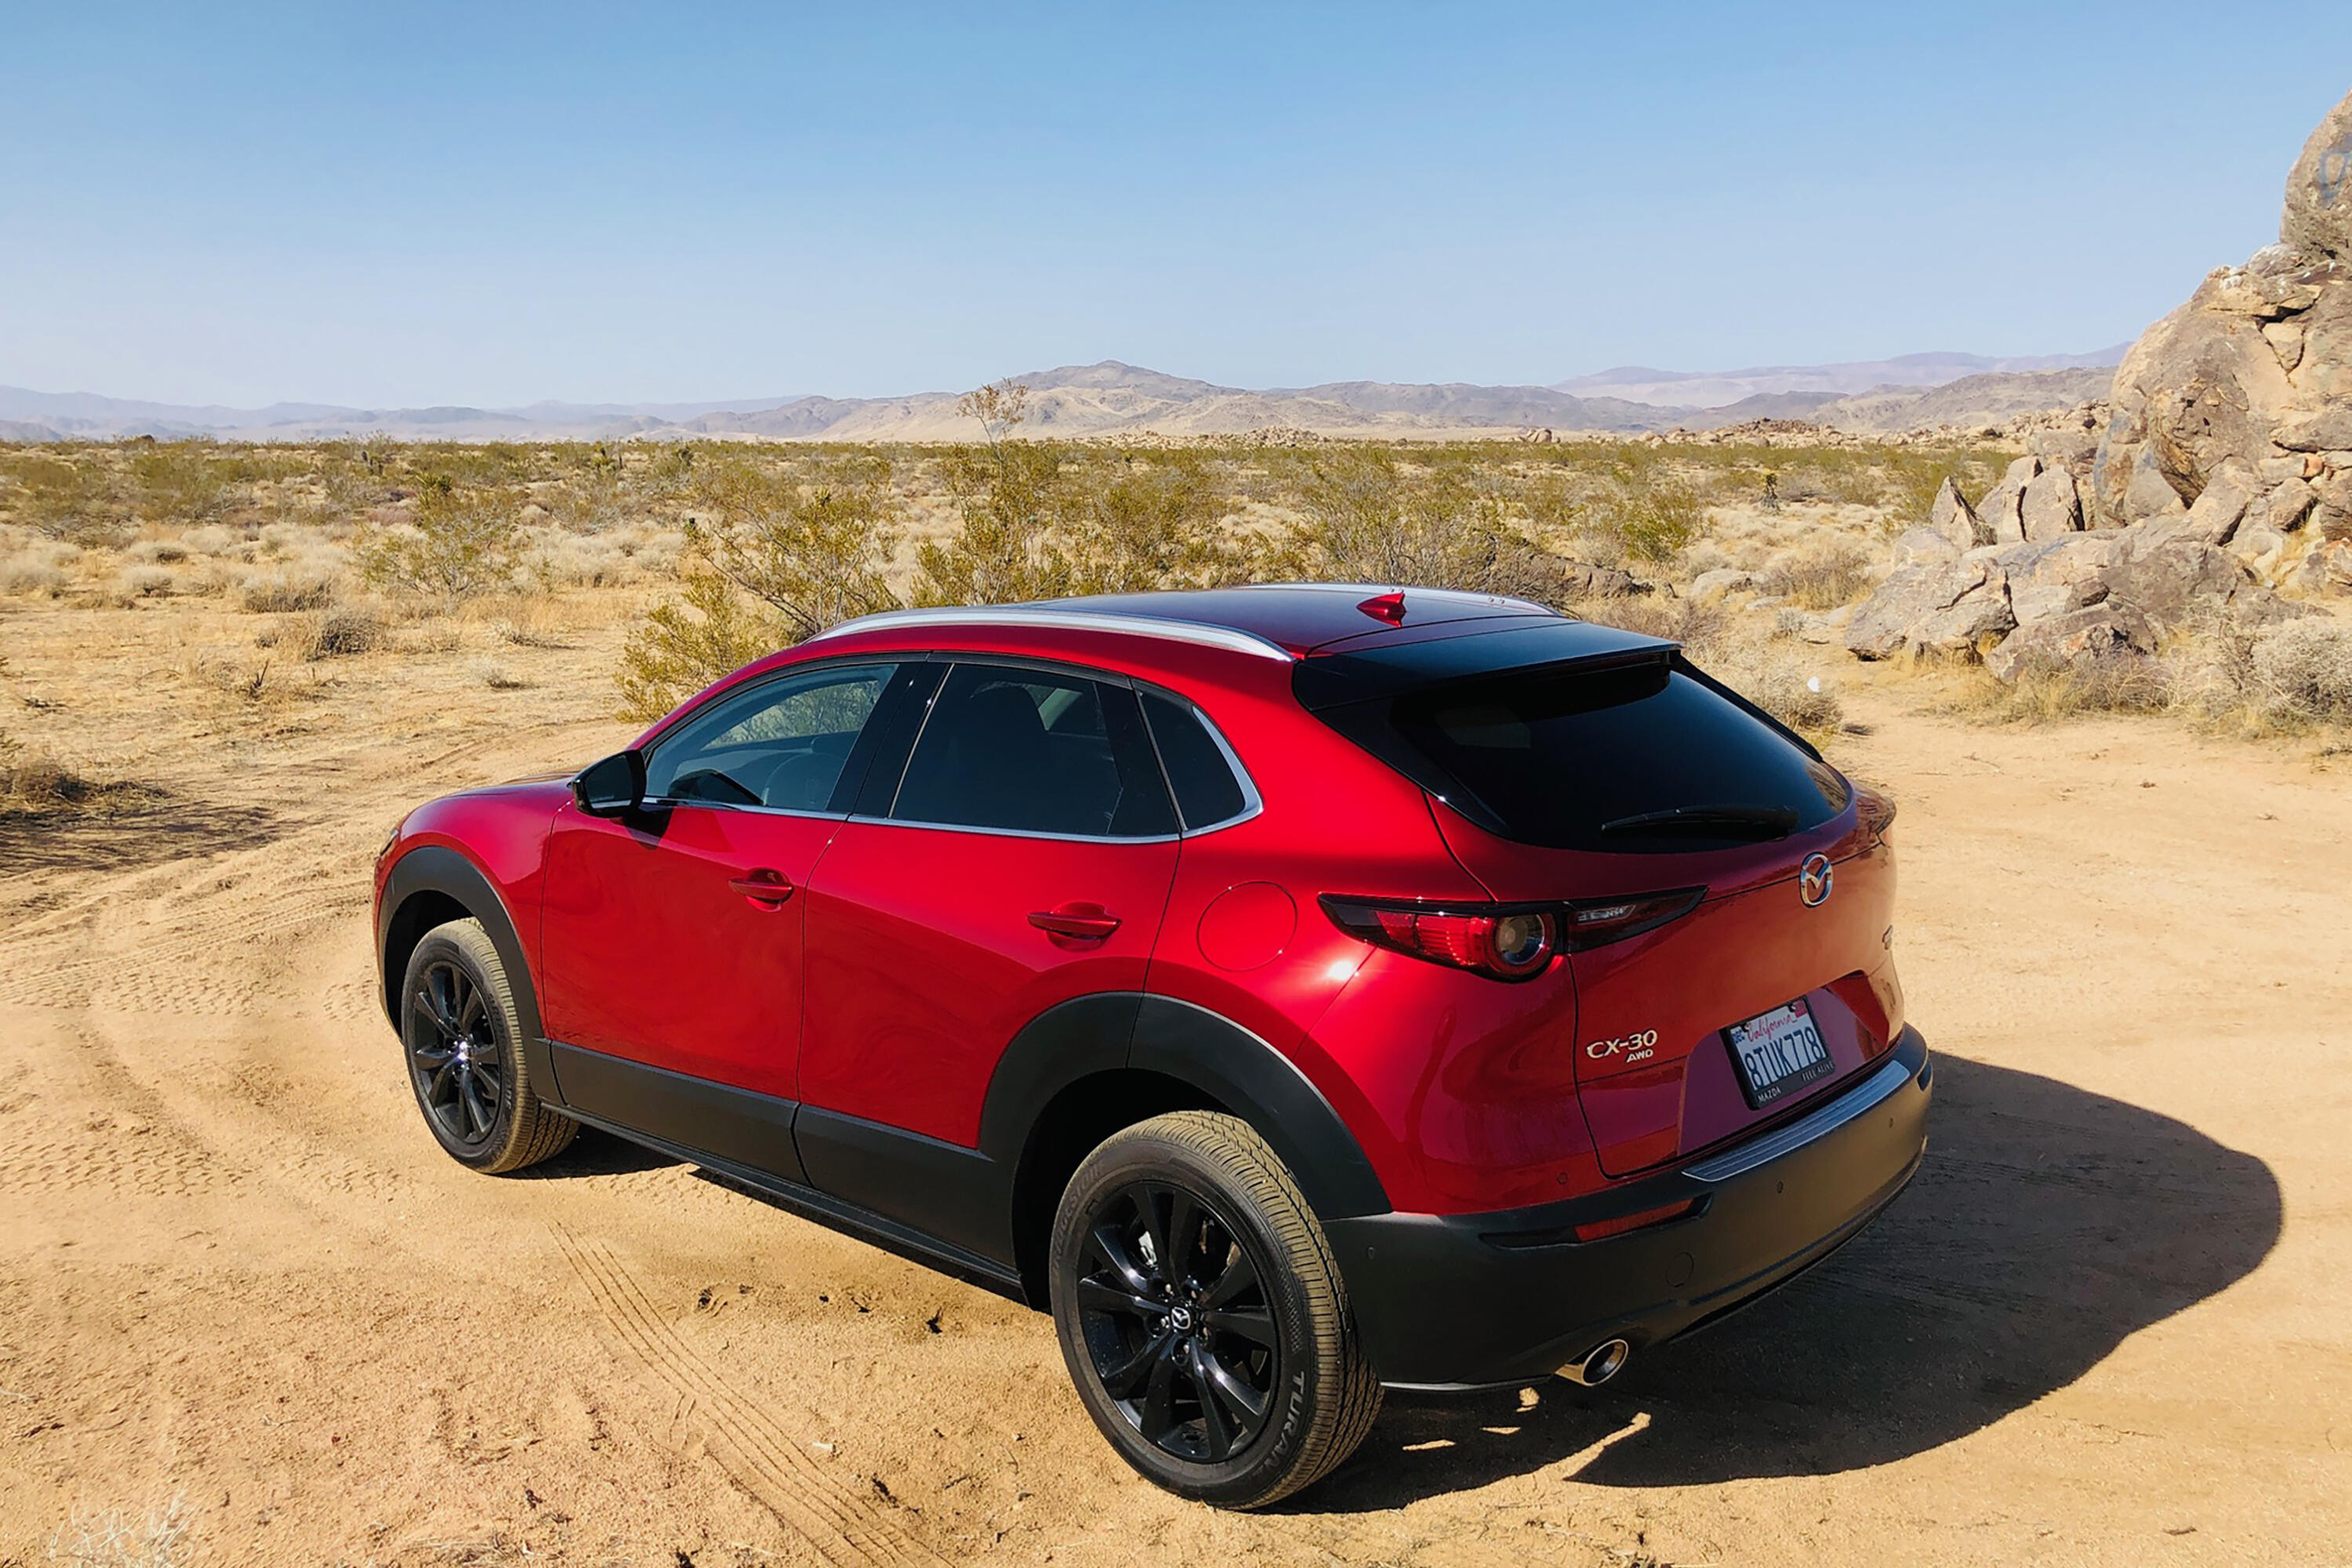 2021 Mazda CX-30 Turbo review: A value-packed performer     - Roadshow